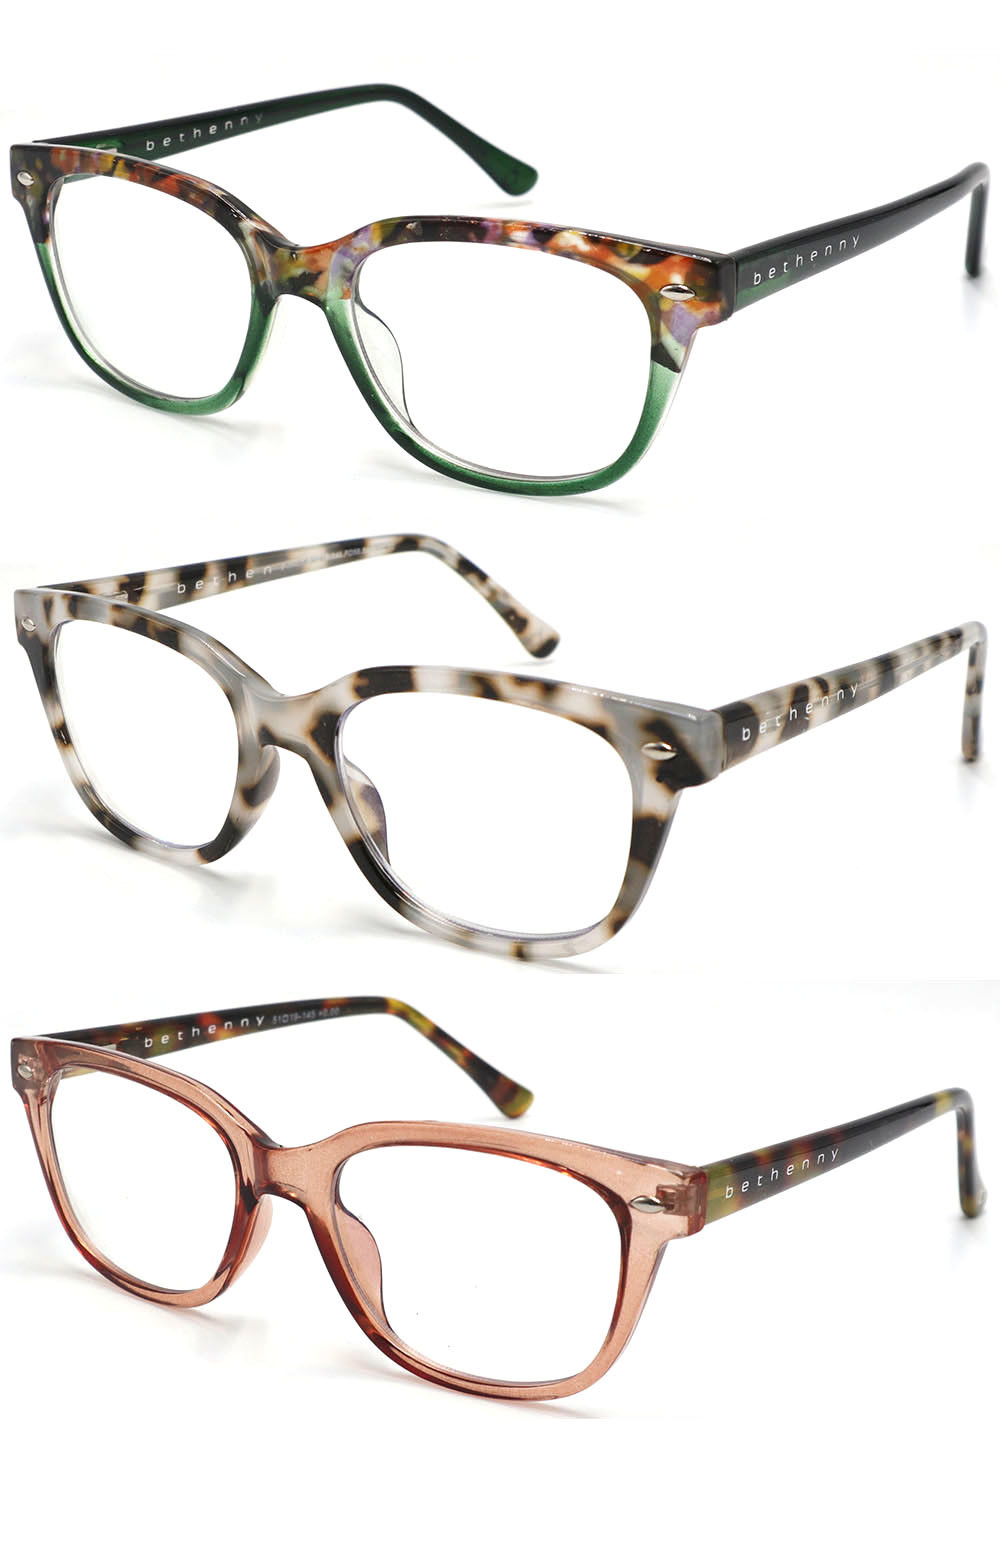 Retro Vintage CP Injection Acetate Glasses Fashion Pattern Reading Glasses